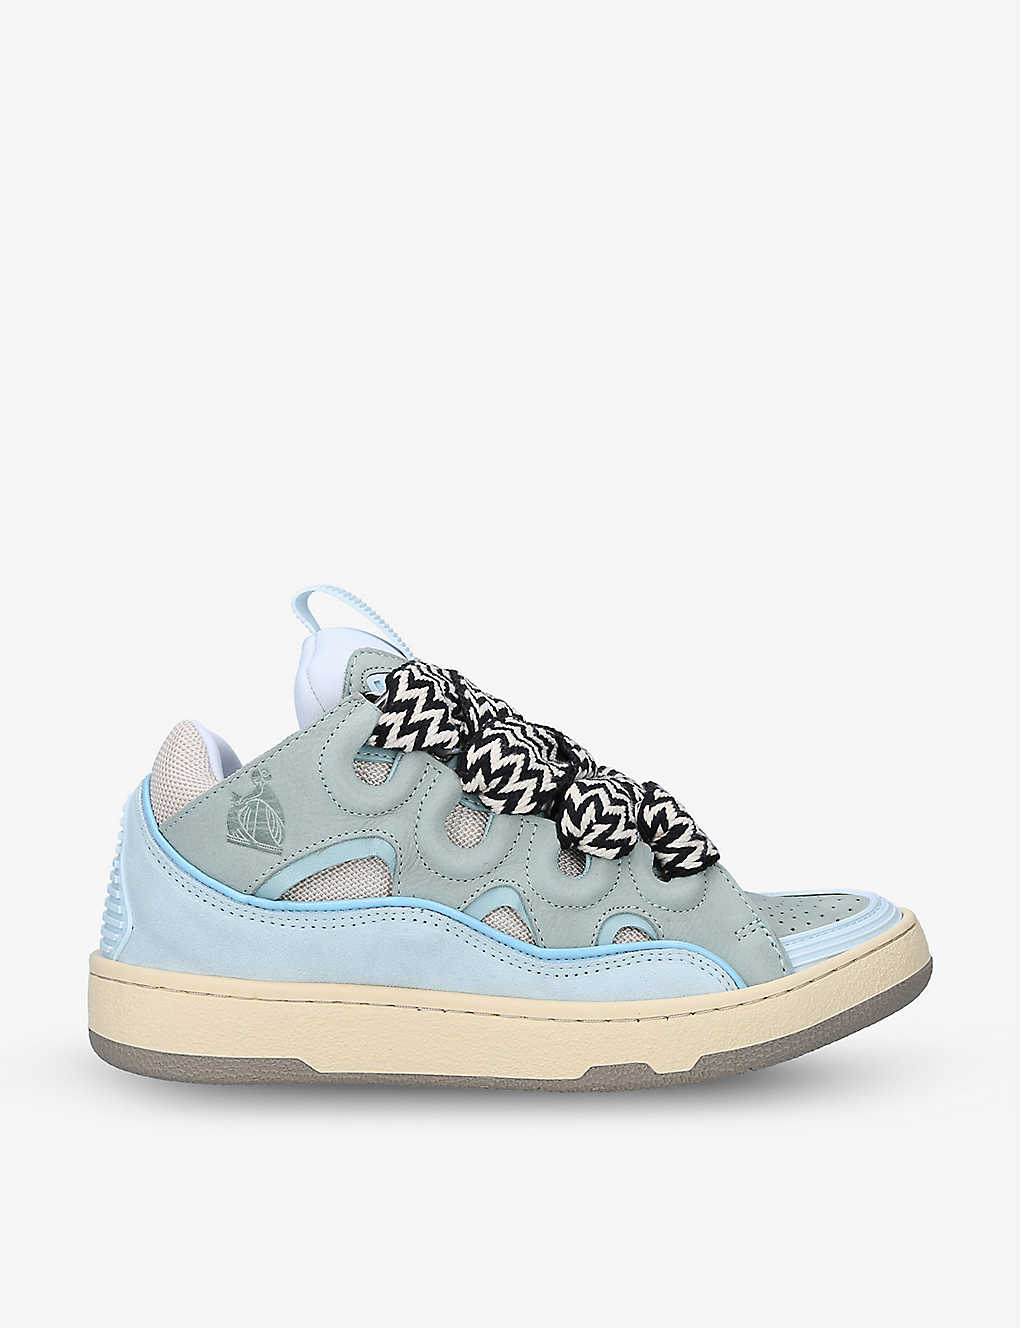 Shop Lanvin Women's Pale Blue Curb Leather, Suede And Mesh Trainers